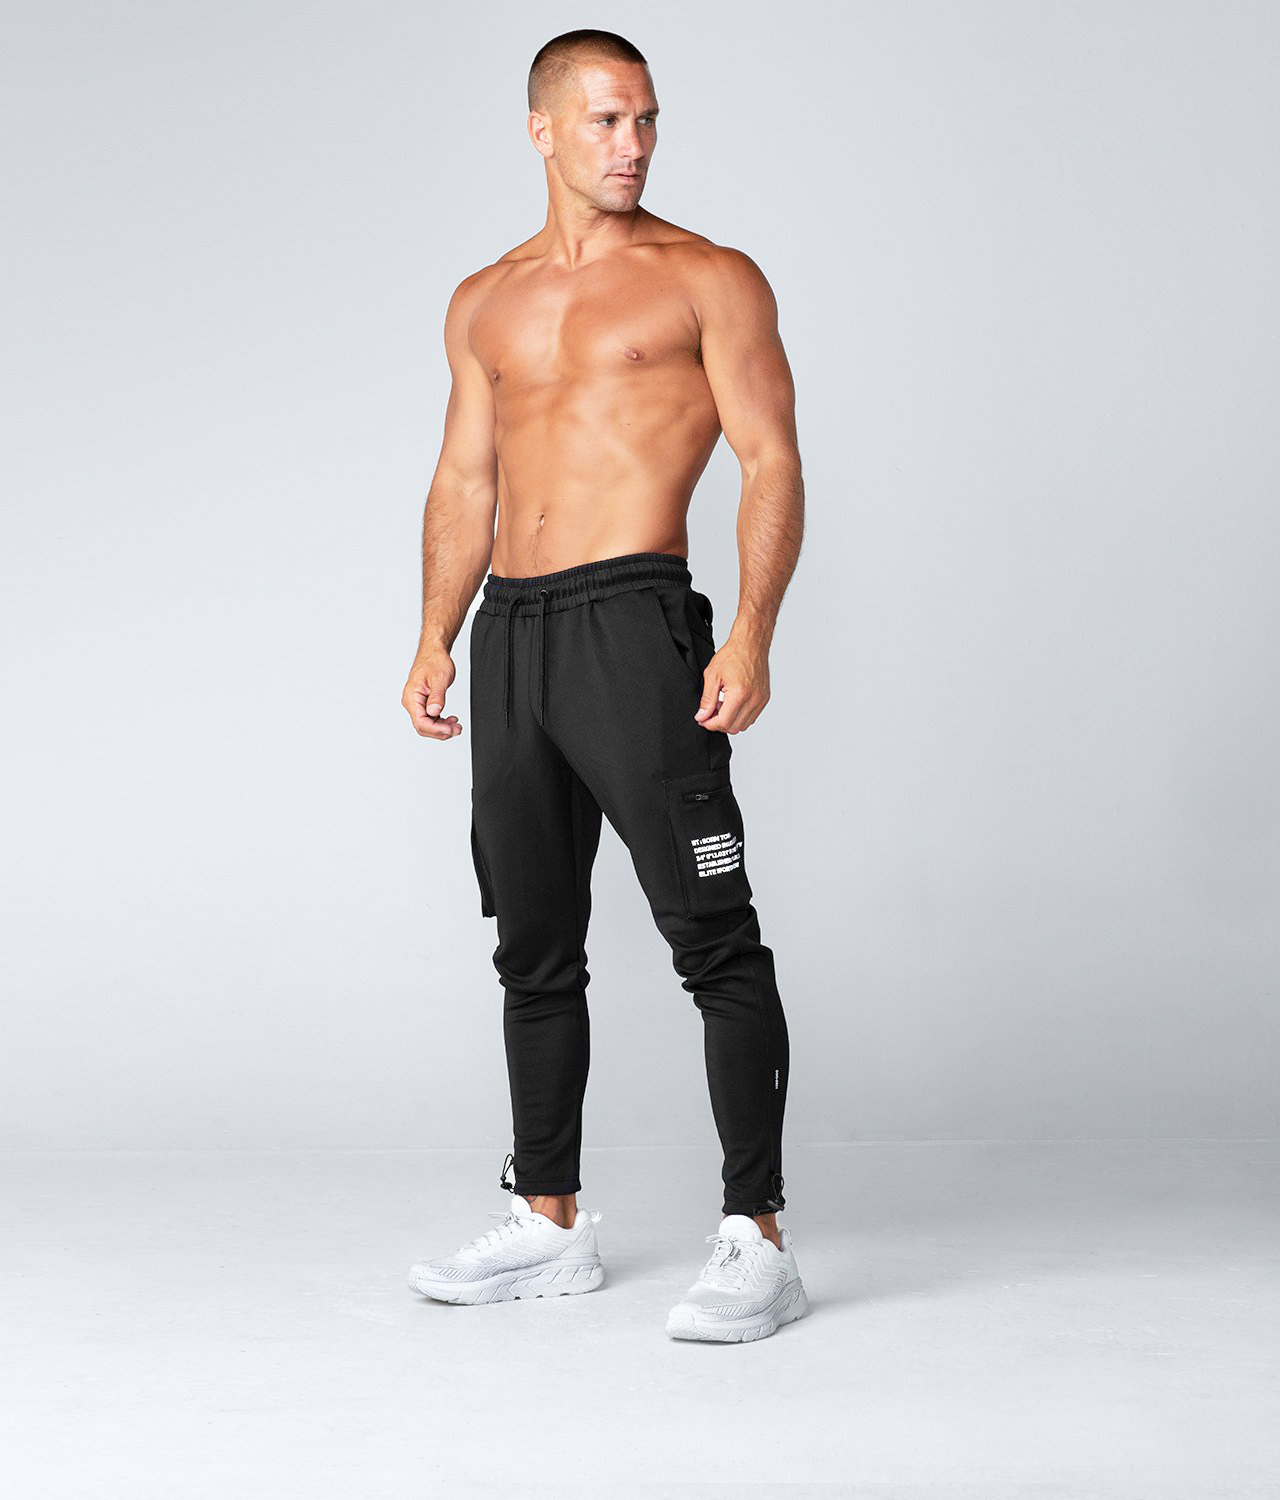 Born Tough Mens Cargo Workout Joggers Pants,Tapered Bodybuilding Gym Cargo  Joggers, Athletic Running Cargo Sweatpants for Men